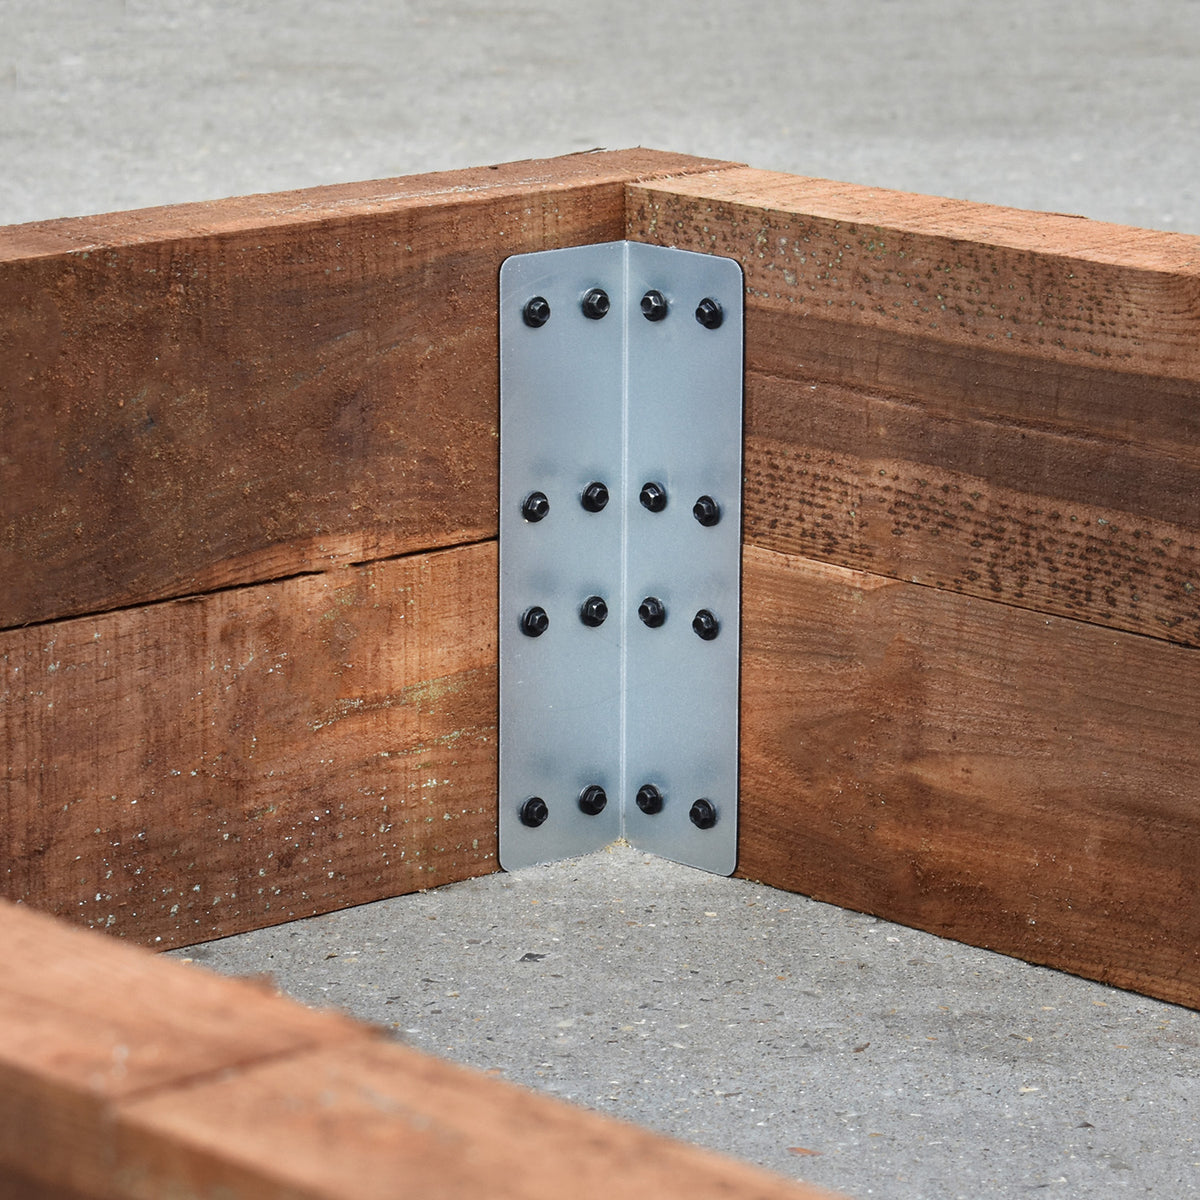 Railway Sleeper Bracket for Joining Corners of Wood in 2-Tier Raised Bed Installations.